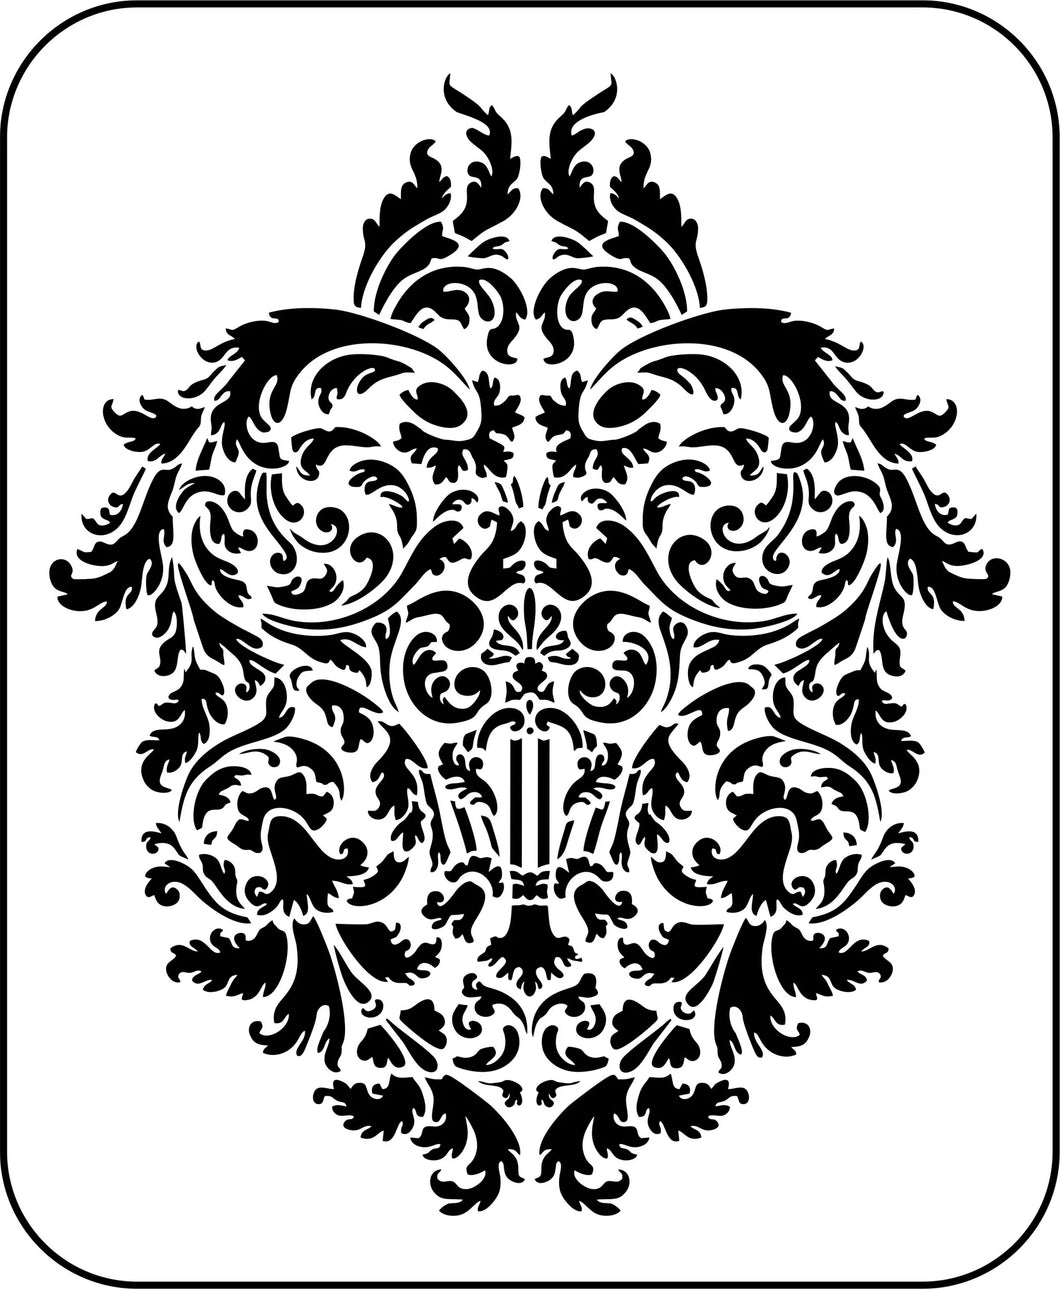 JRV Musical Damask Stencil Designed By Vintage Retail Therapy by Mara